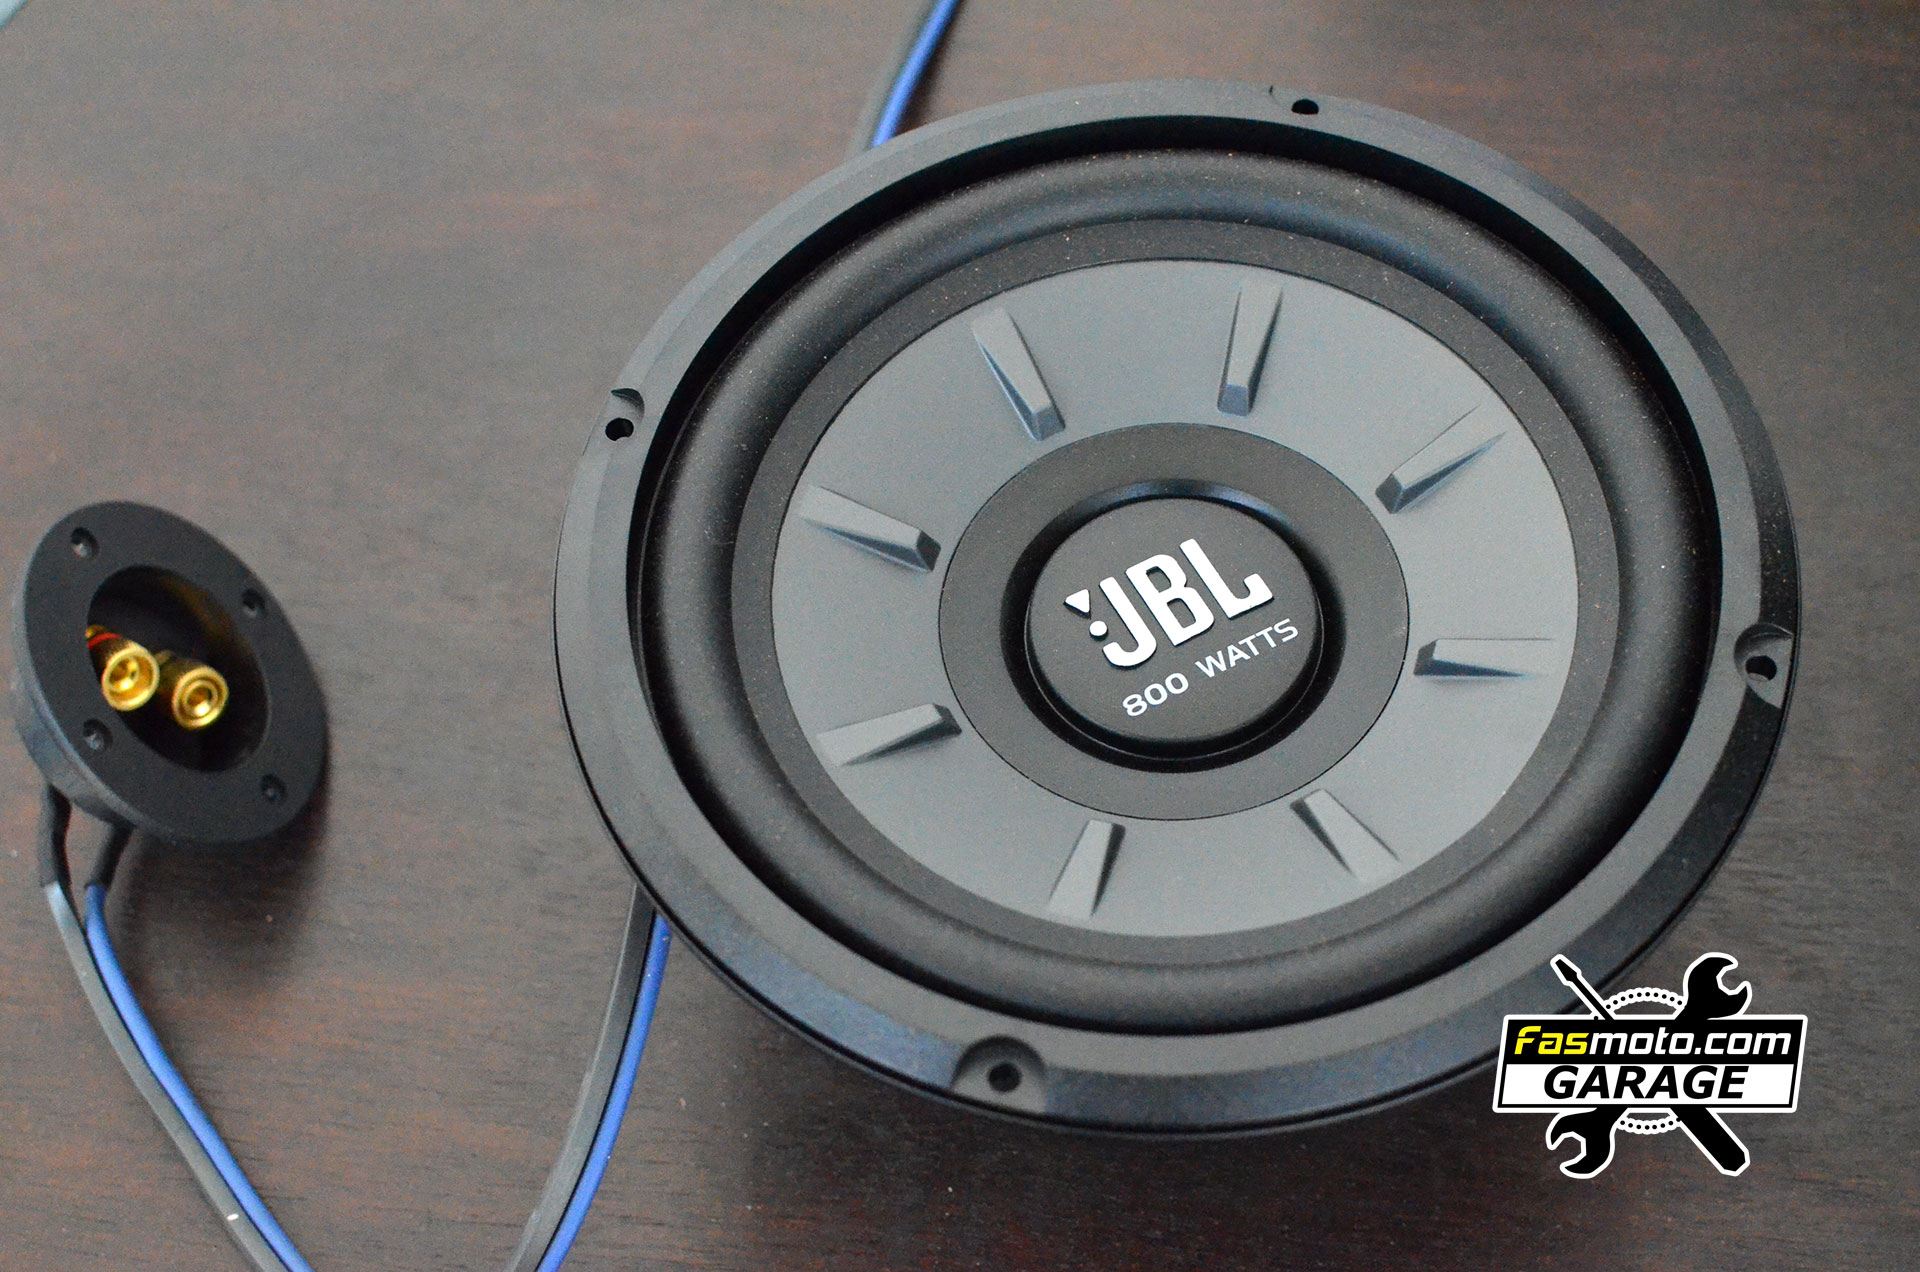 Subwoofer of choice, the 8" JBL Stage 810. 